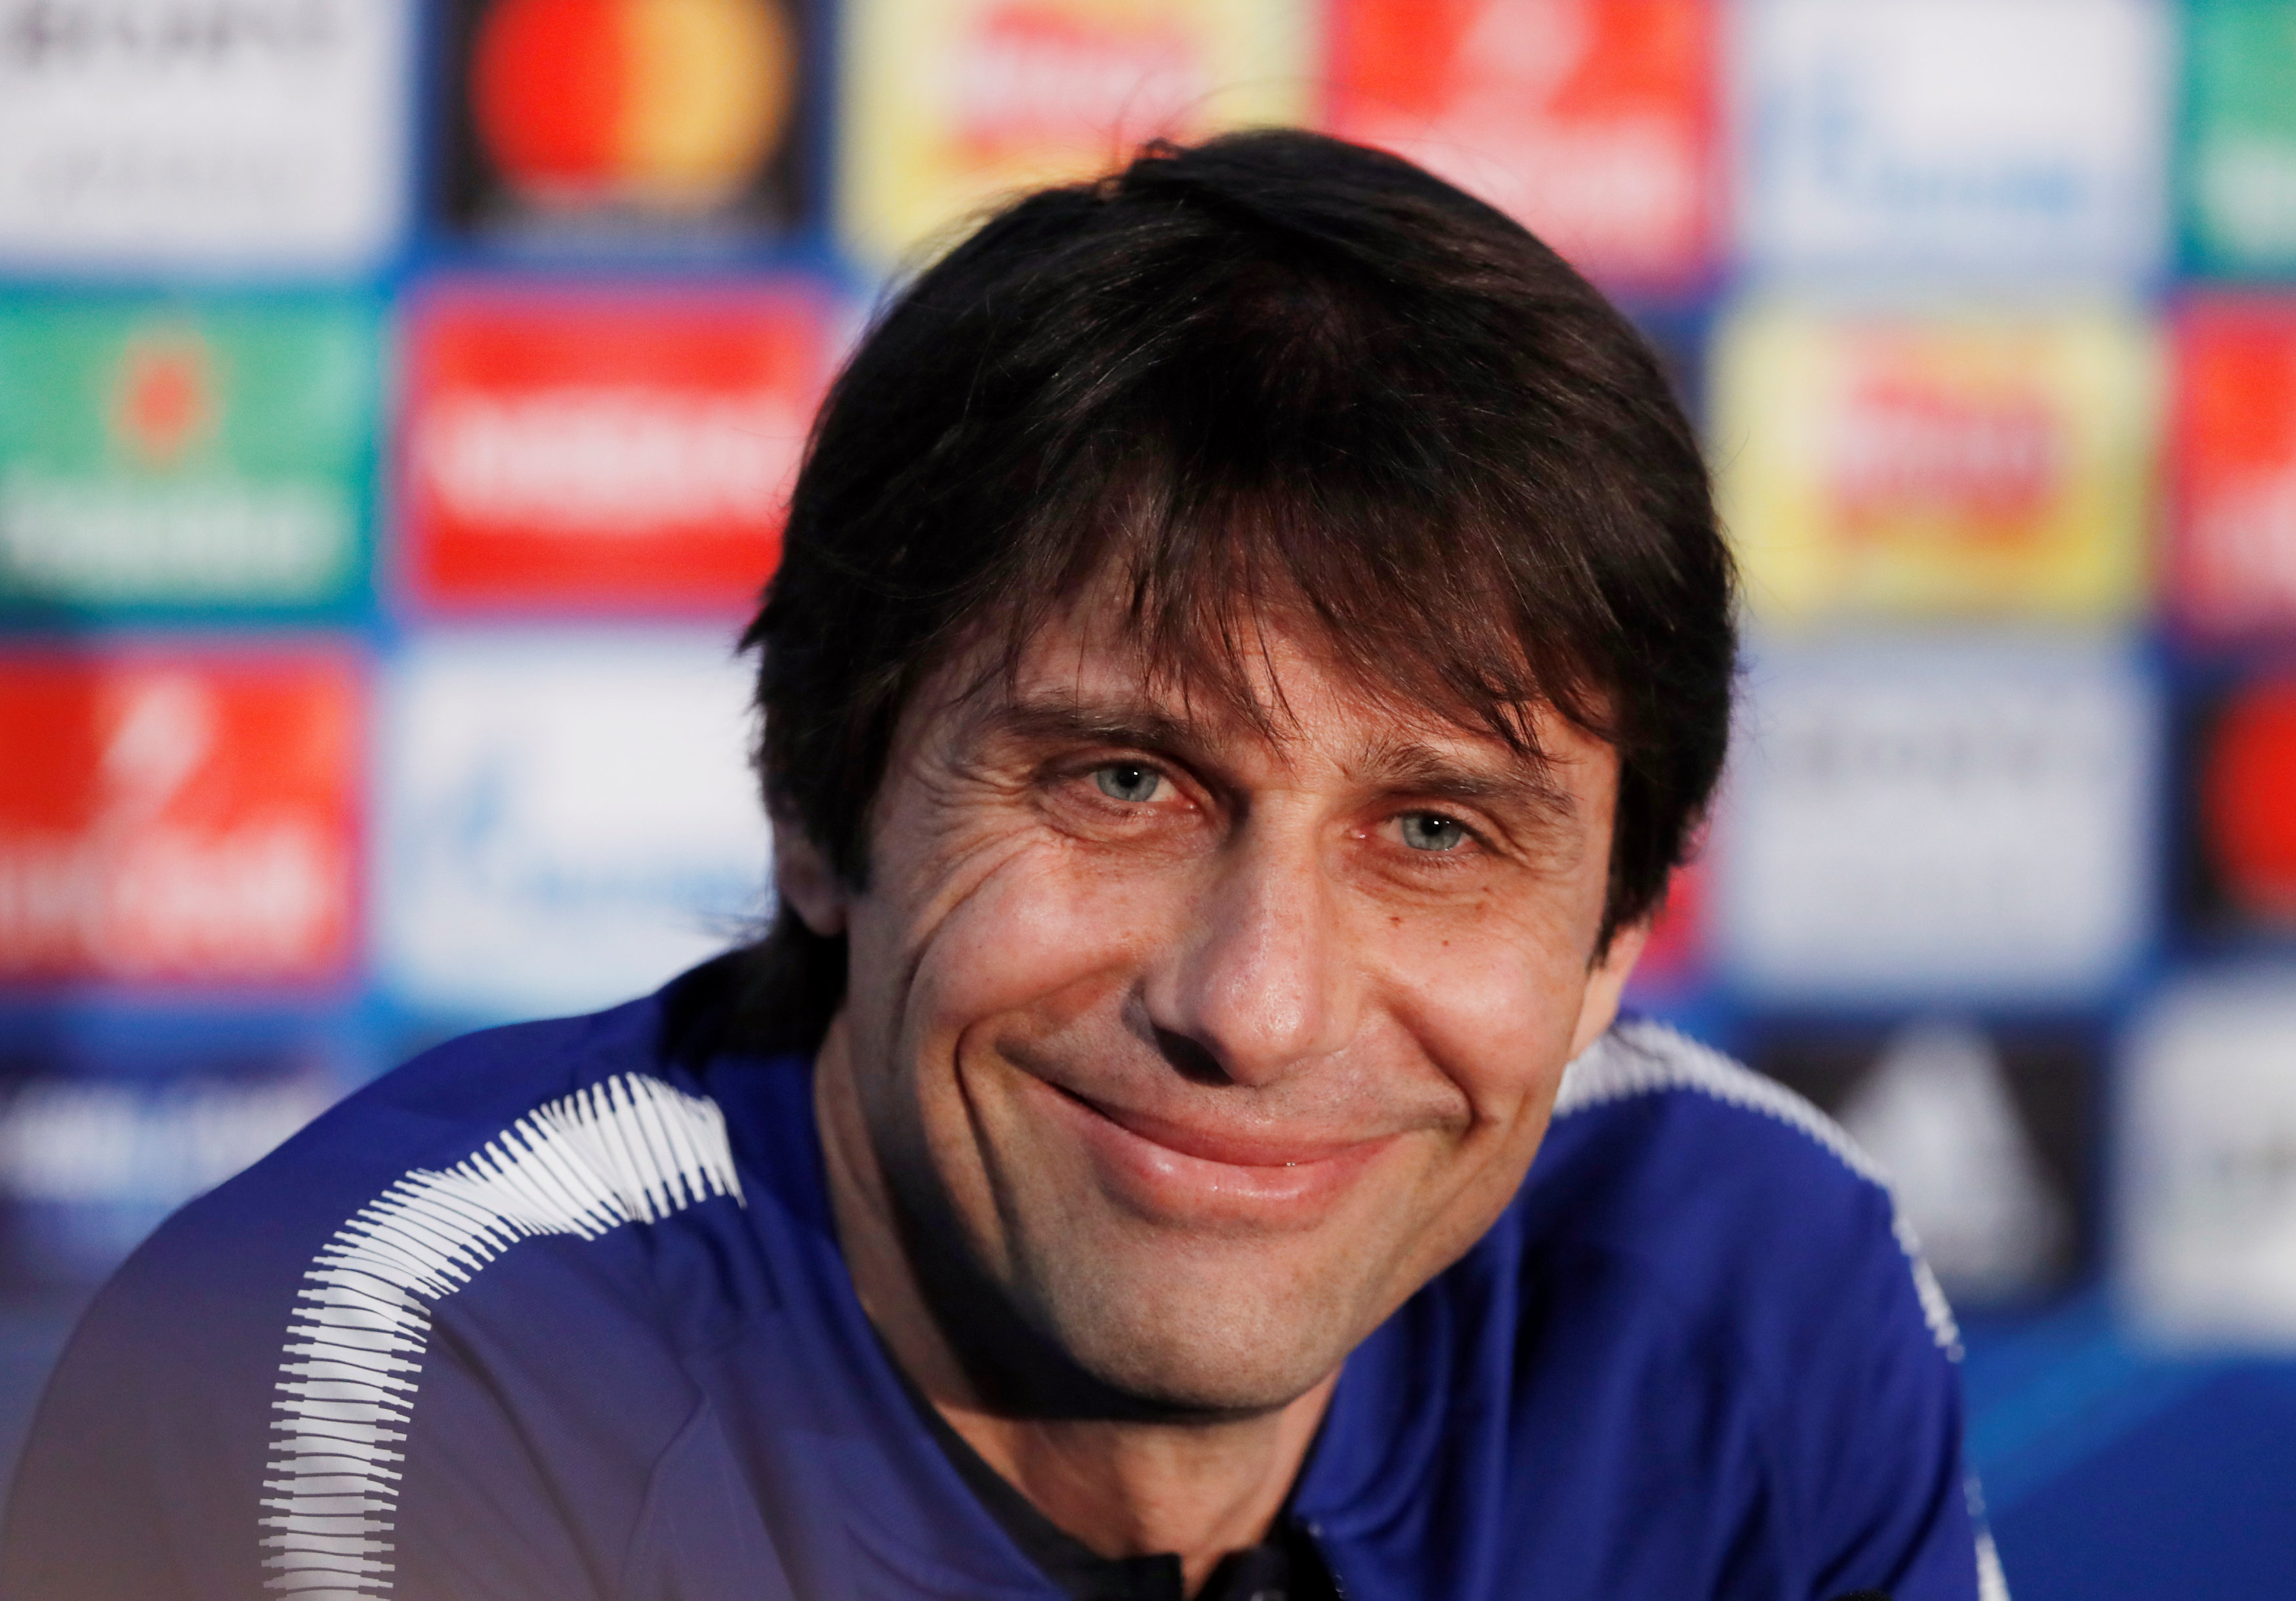 Chelsea's Conte has sleepless nights before Barca clash